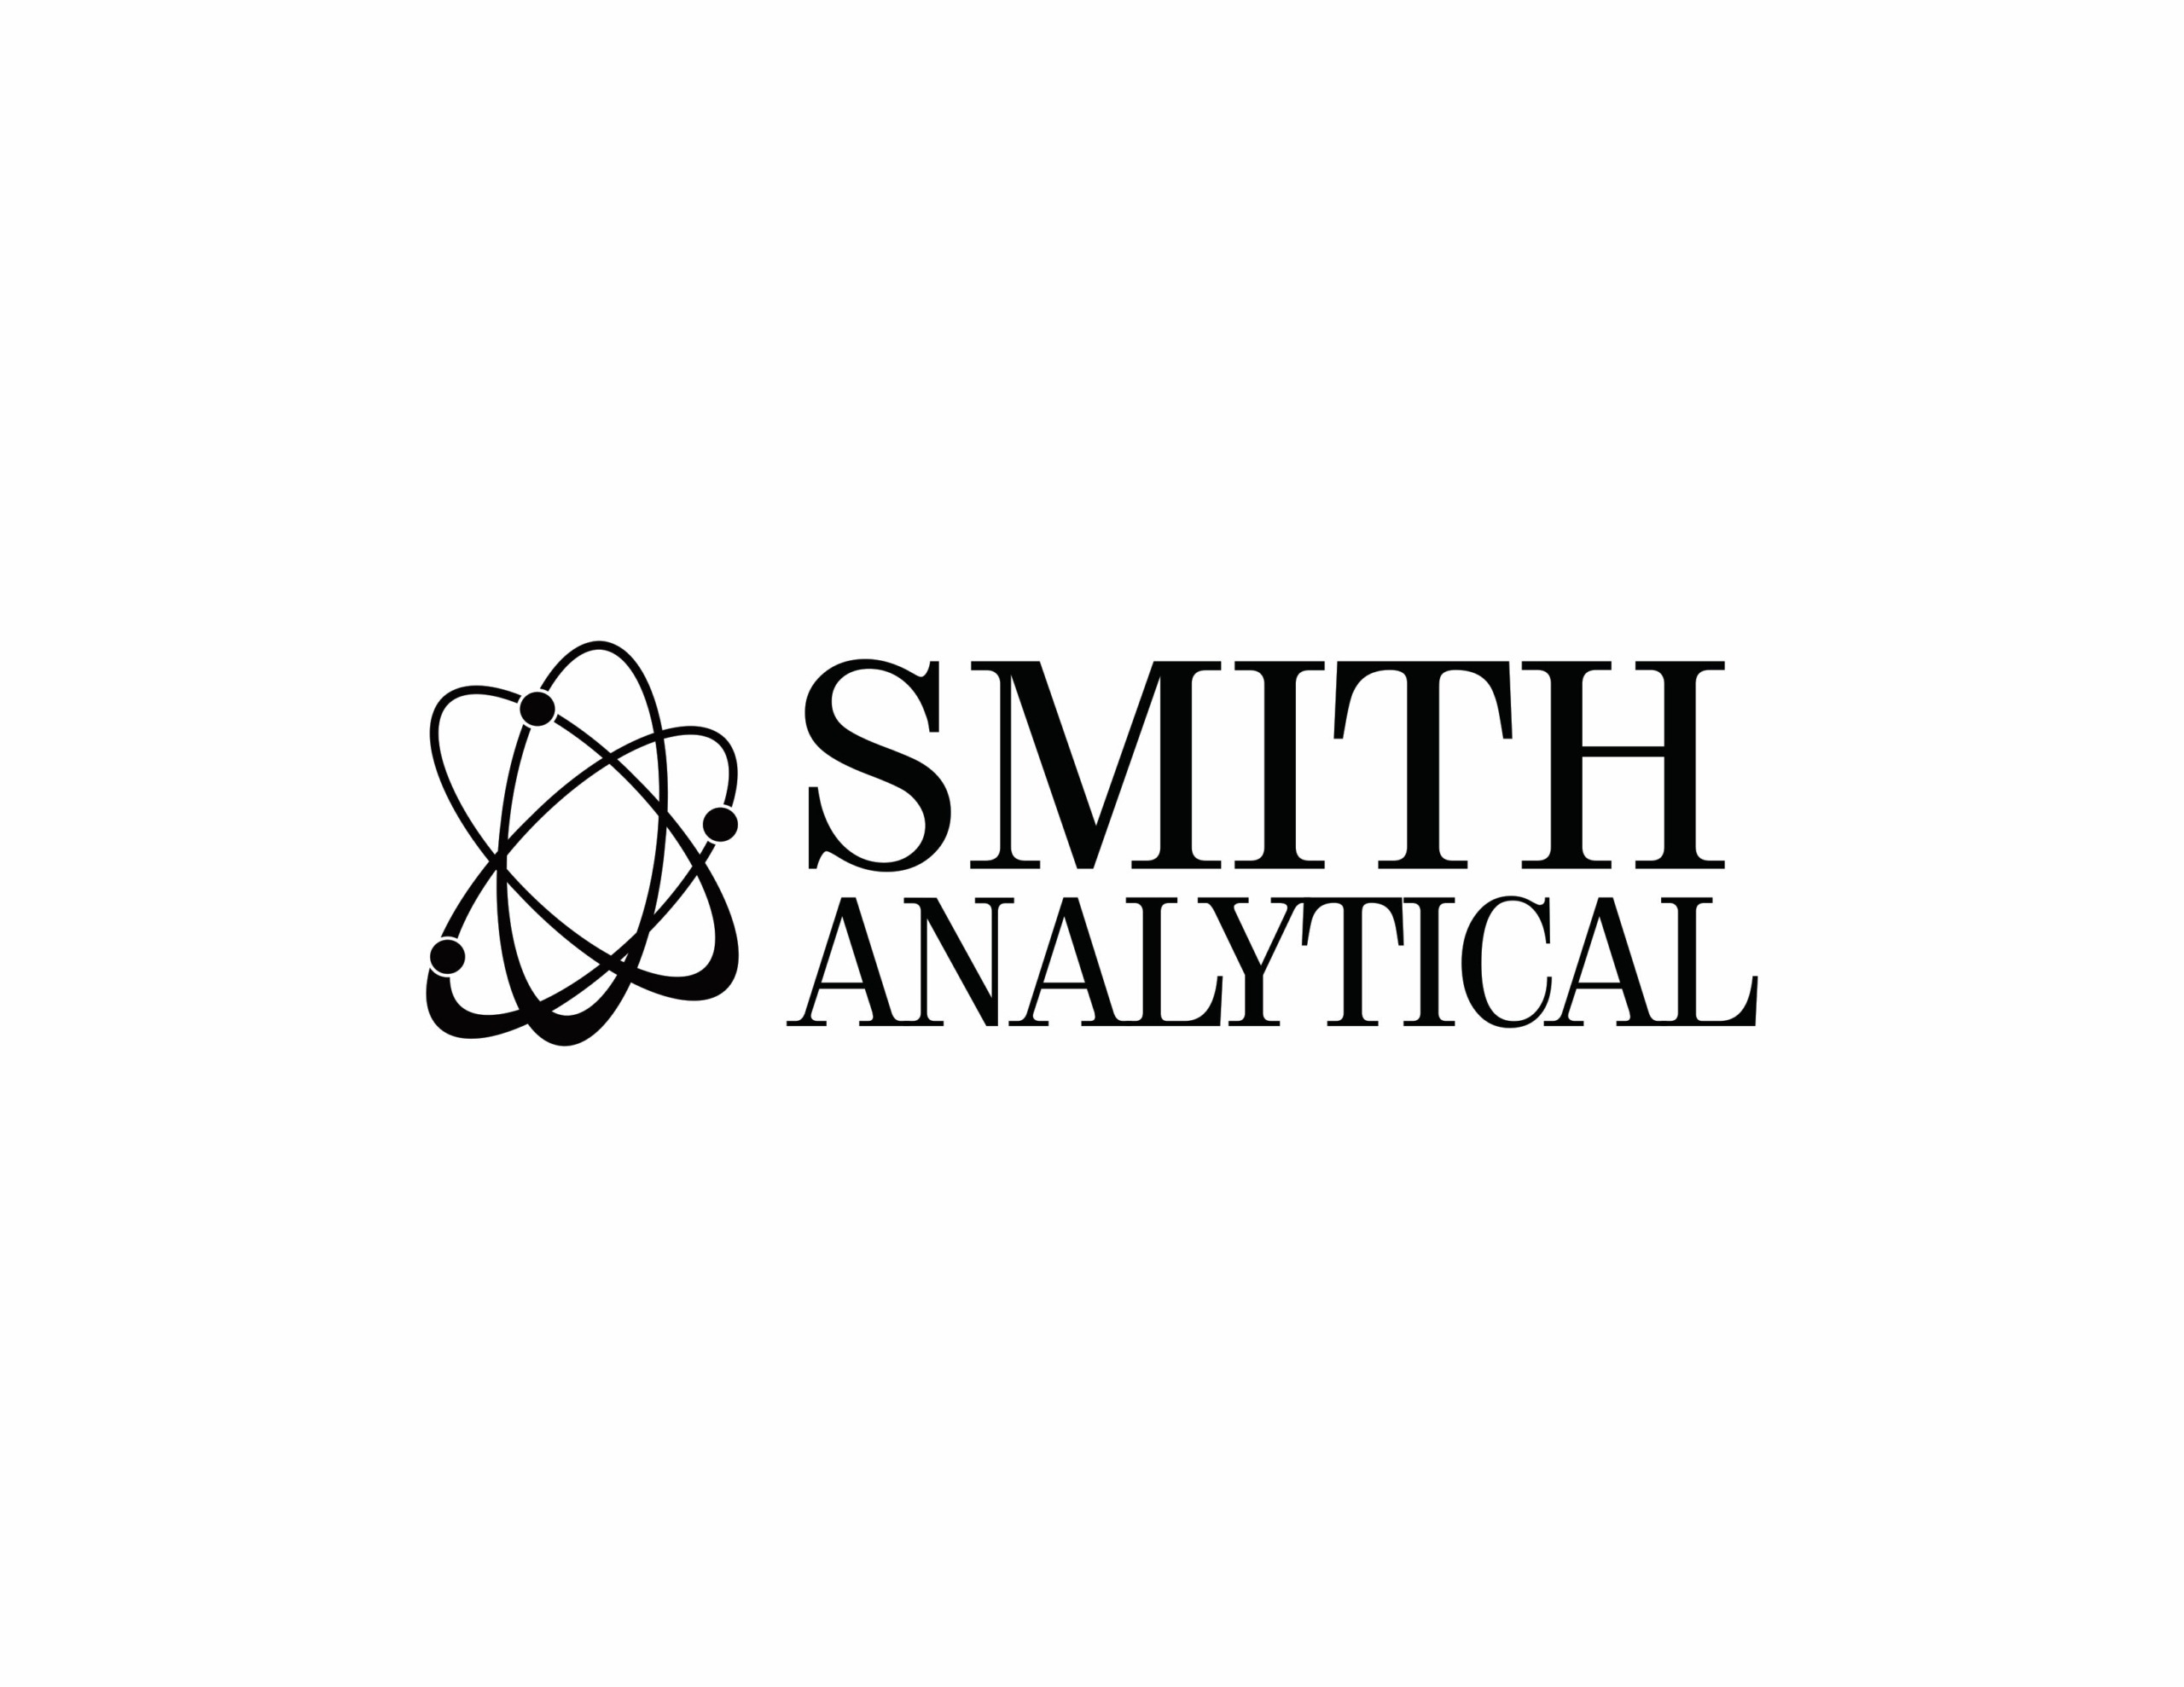 Smith Analytical